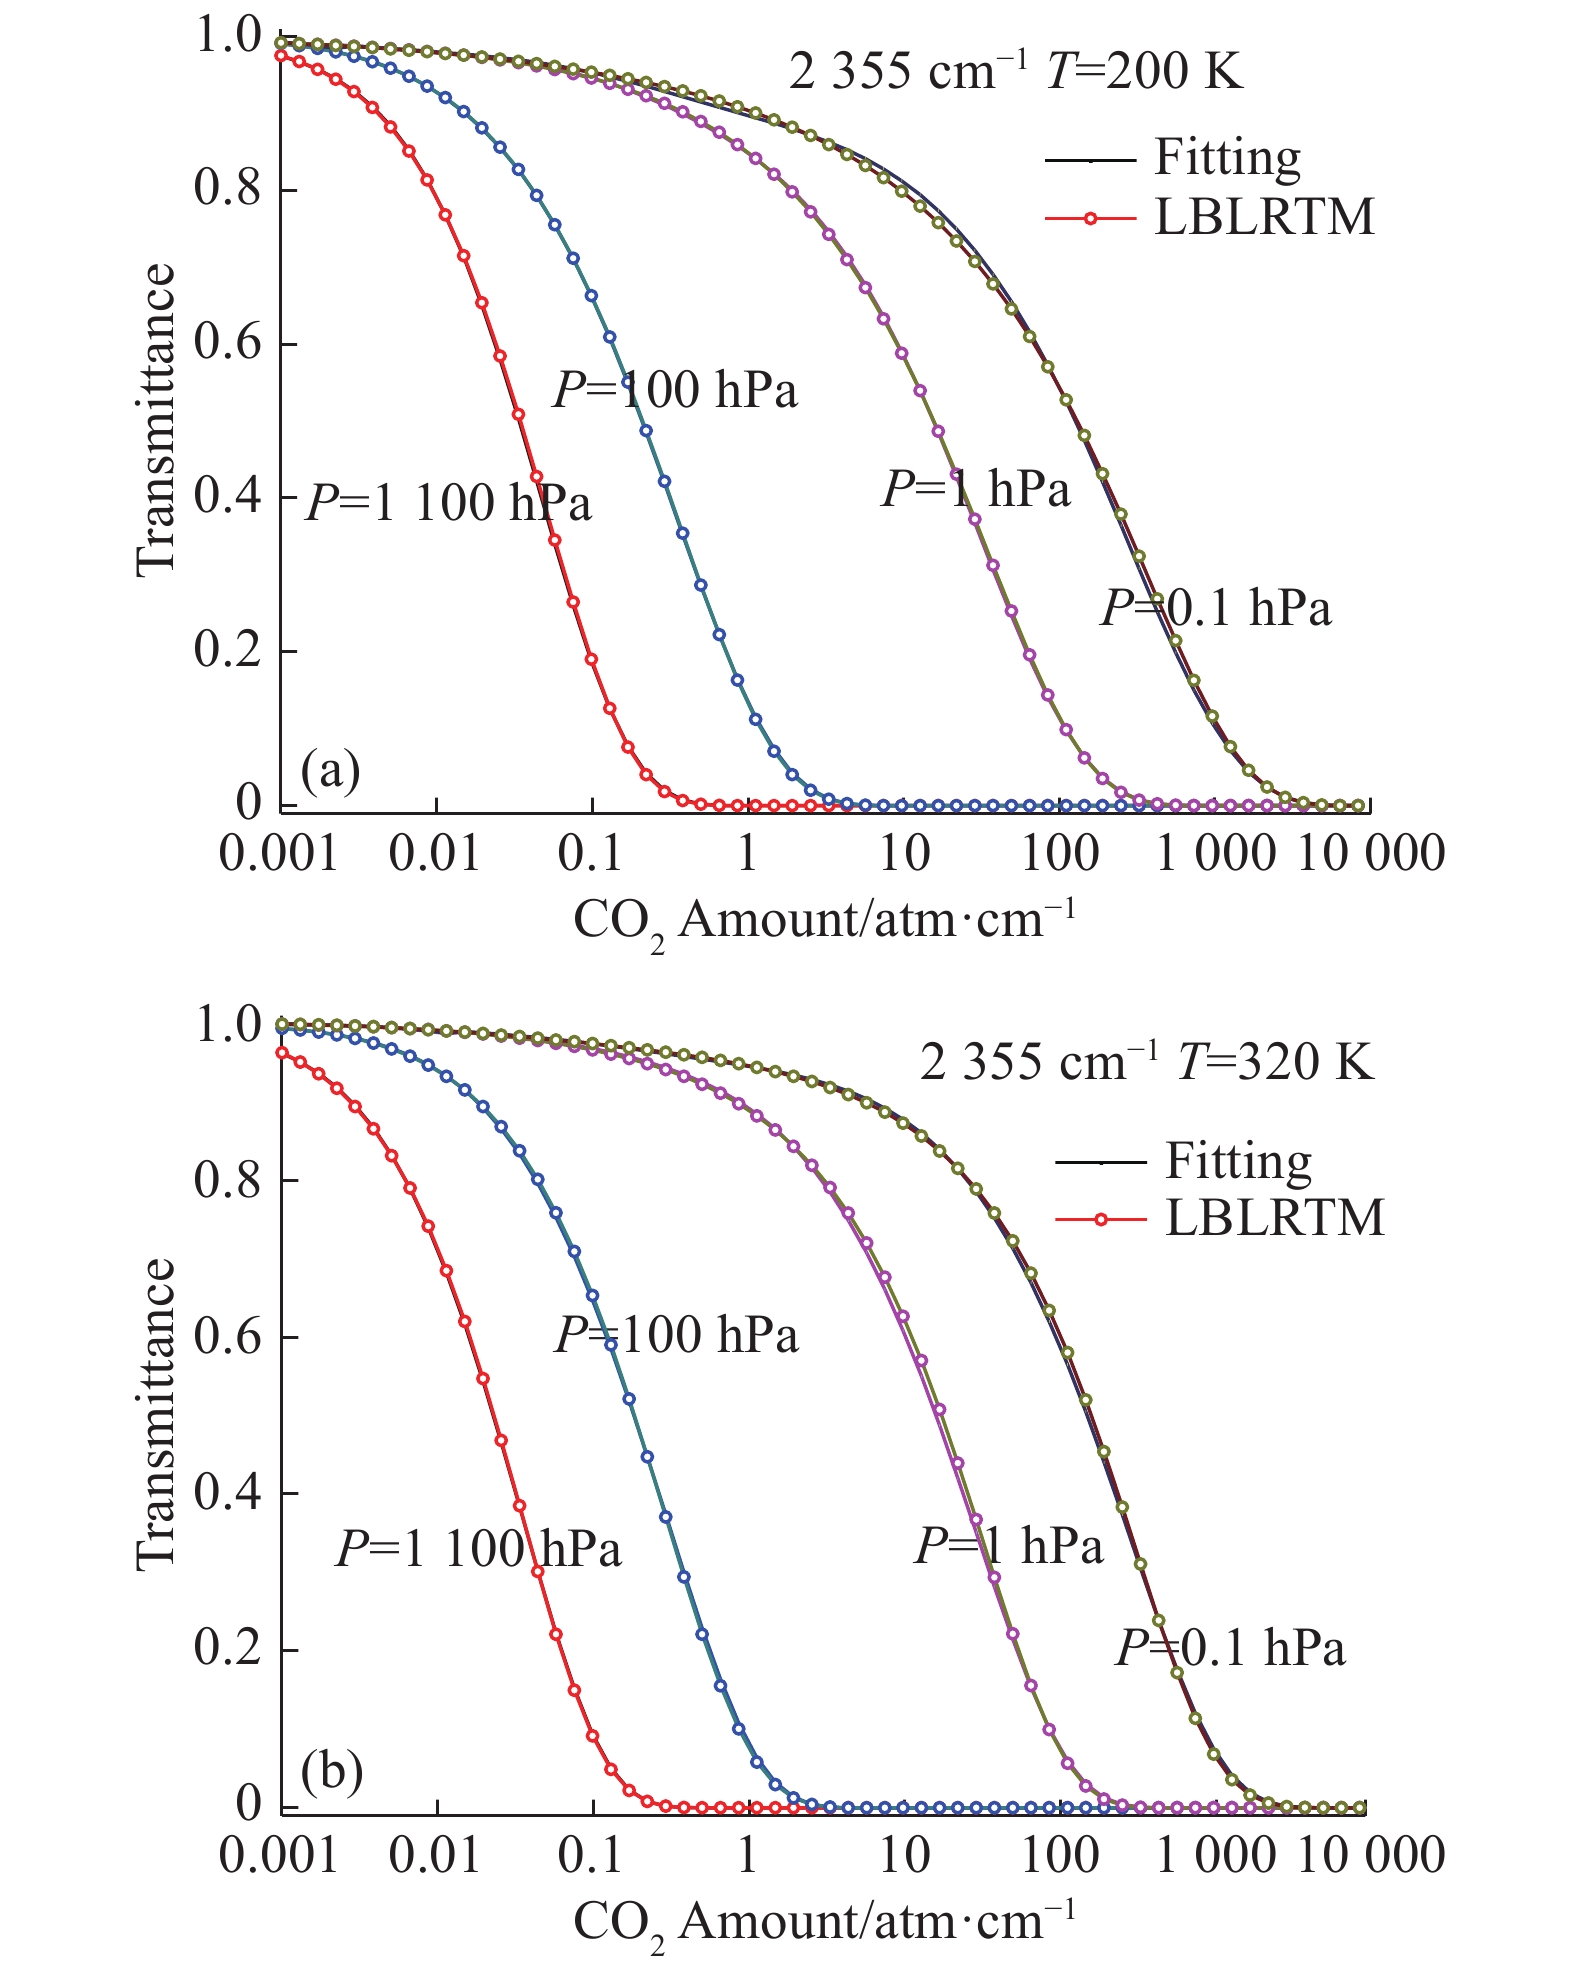 CO2 transmittance computed with the LBLRTM and fast fitting method vs CO2content at various temperatures, pressures